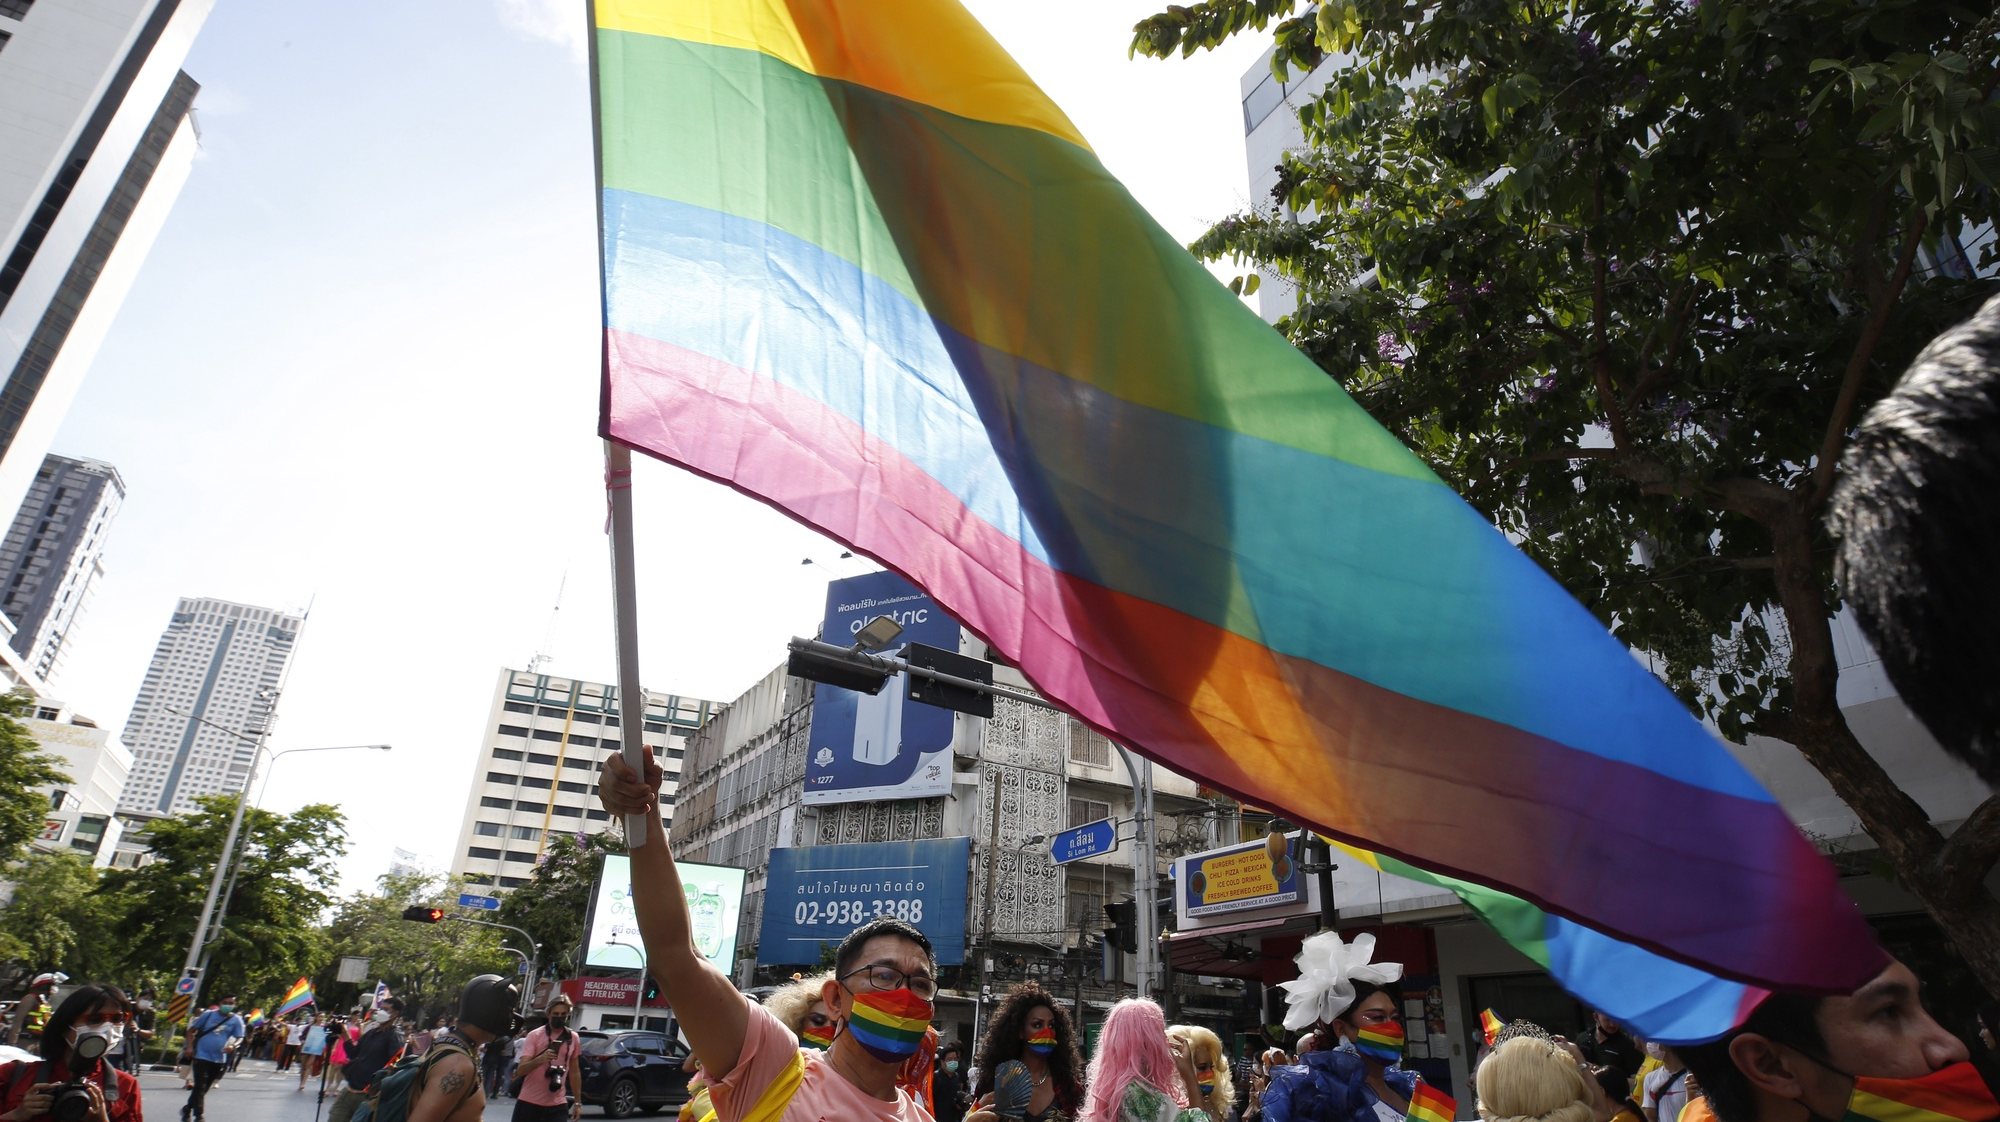 epa09997362 People of LGBT community take part in the parade to mark pride day 2022 in Bangkok, Thailand, 05 June 2022. Thousands of Thai and foreigns are taking part in the parade at Silom Road, a major business district of Bangkok, of the pride month is celebrated across the world annually in June to commemorate the 1969 Stonewall uprising to raise awareness and promote sexual diversity equal rights for the Lesbian, Gay, Bisexual, Transgender and Queer (LGBTQ) community. Thailand has been regarded as &#039;Utopia&#039;, a haven friendly country for LGBTQ people but the kingdom still ban and not legally recognize same-sex marriage.  EPA/NARONG SANGNAK